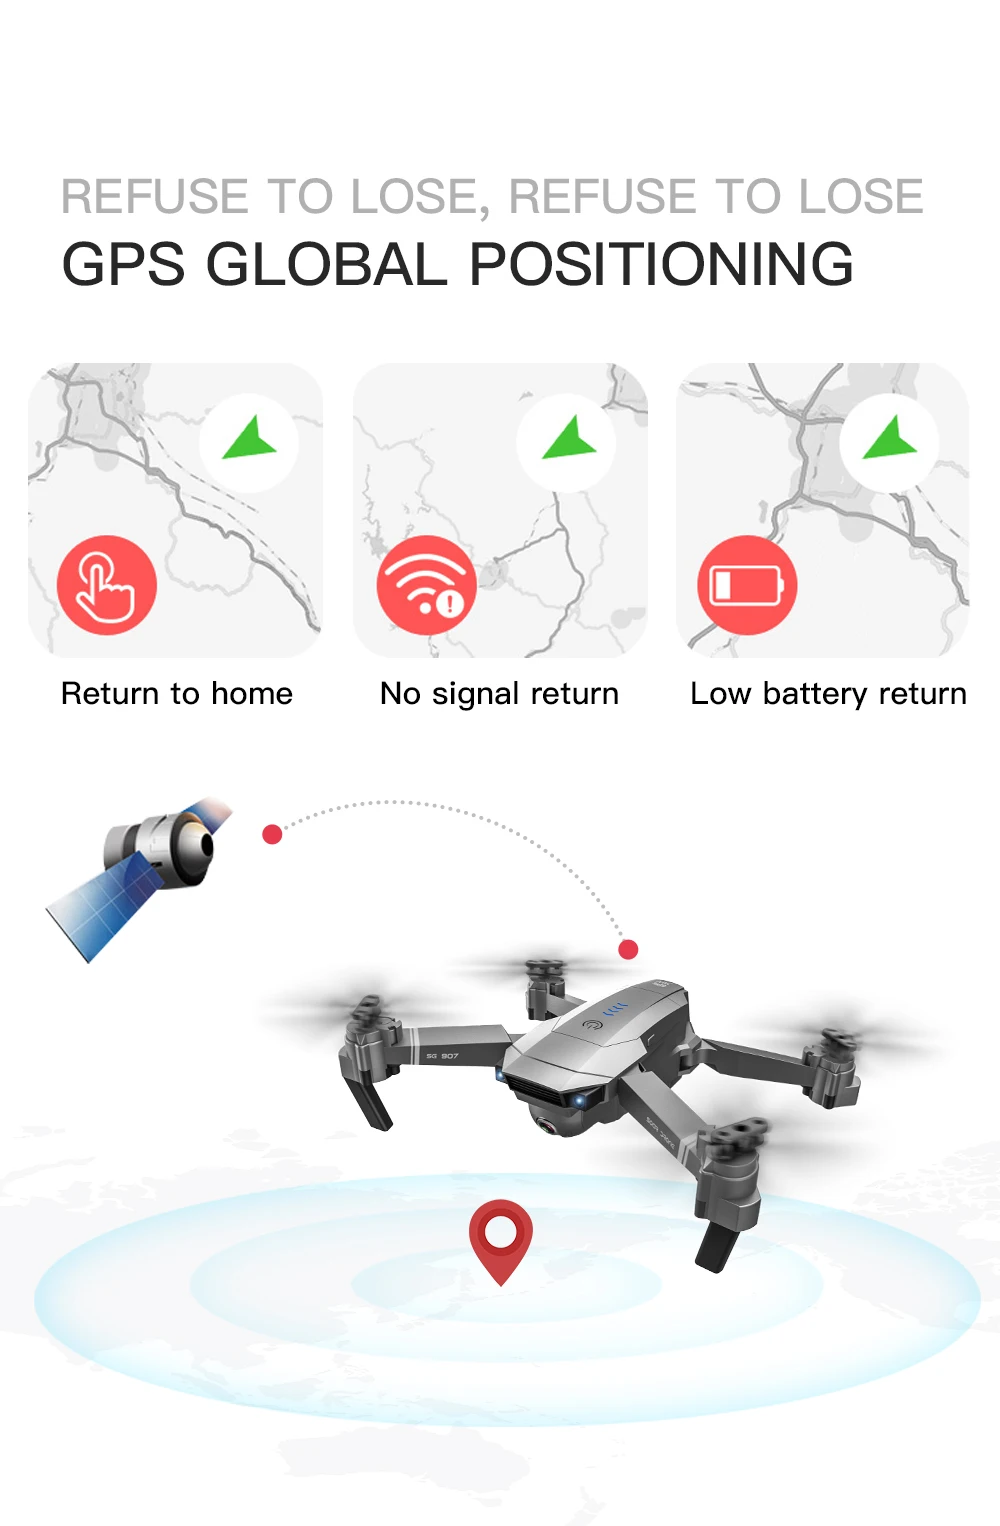 SG907 GPS Drone with 4K HD Adjustment Dual Camera Wide Angle 5G WIFI FPV RC Quadcopter Professional Foldable Drones